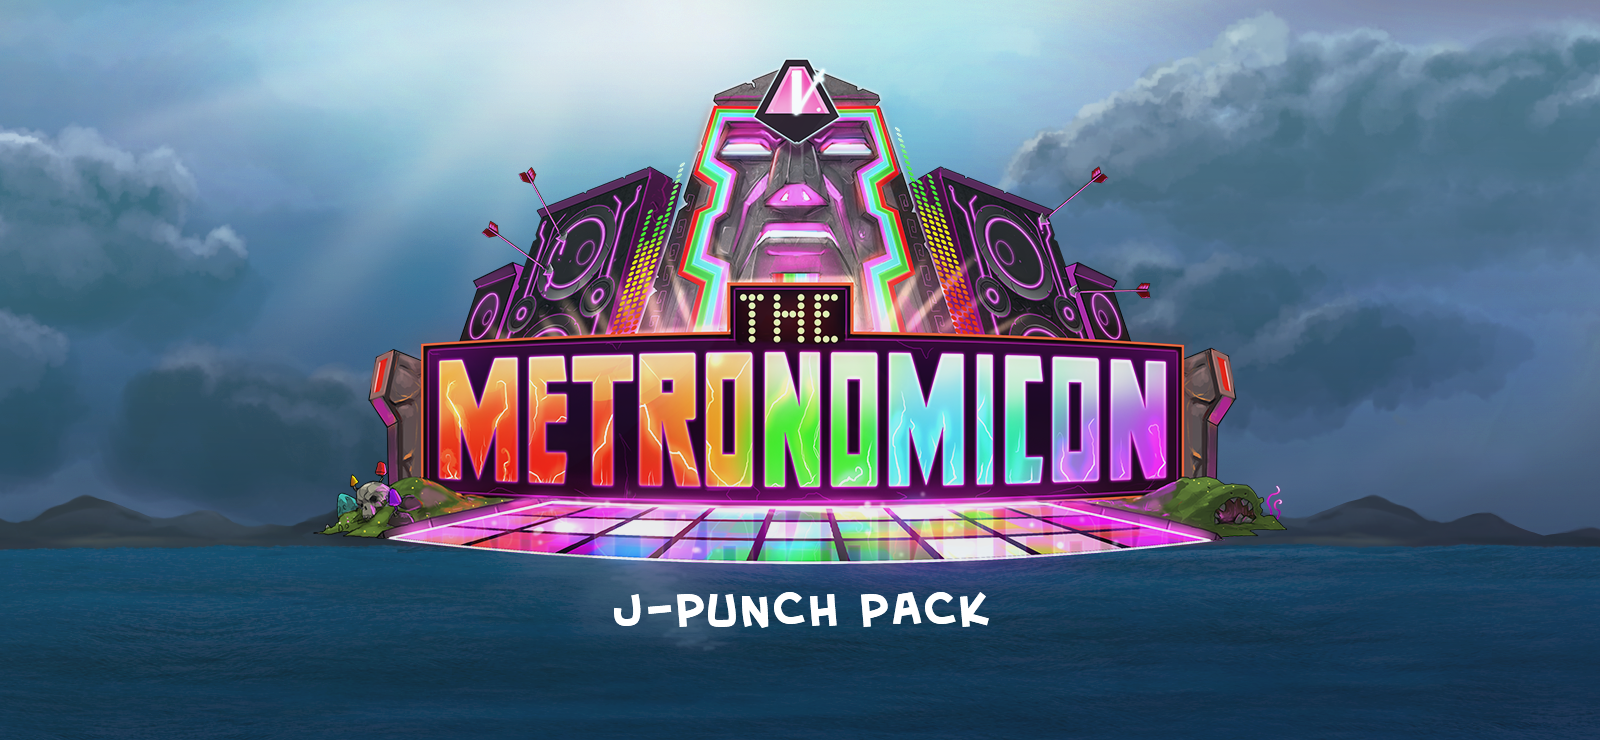 The Metronomicon - J-Punch Pack